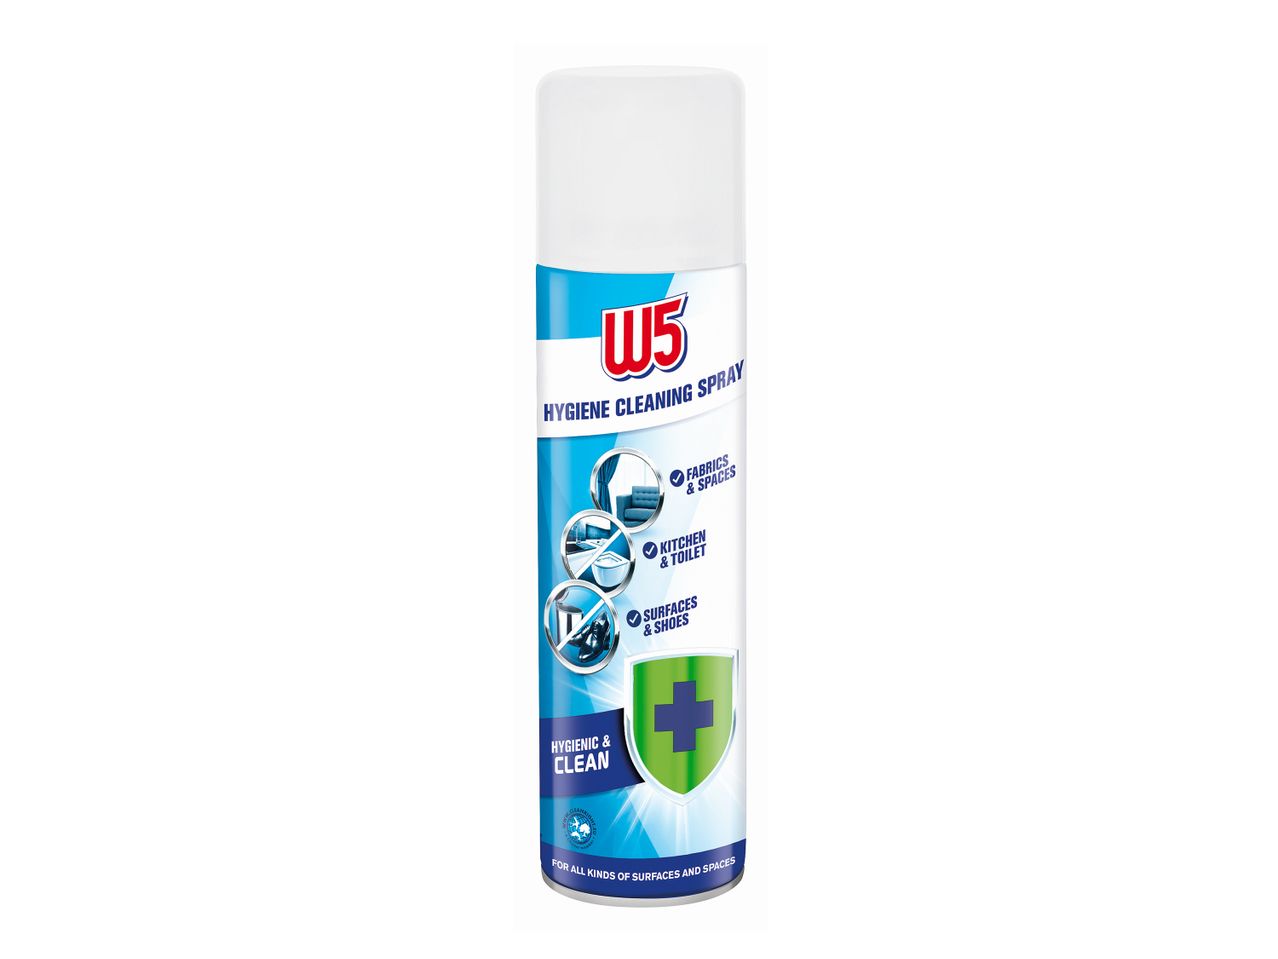 Go to full screen view: W5 Hygiene Cleaning Spray - Image 1